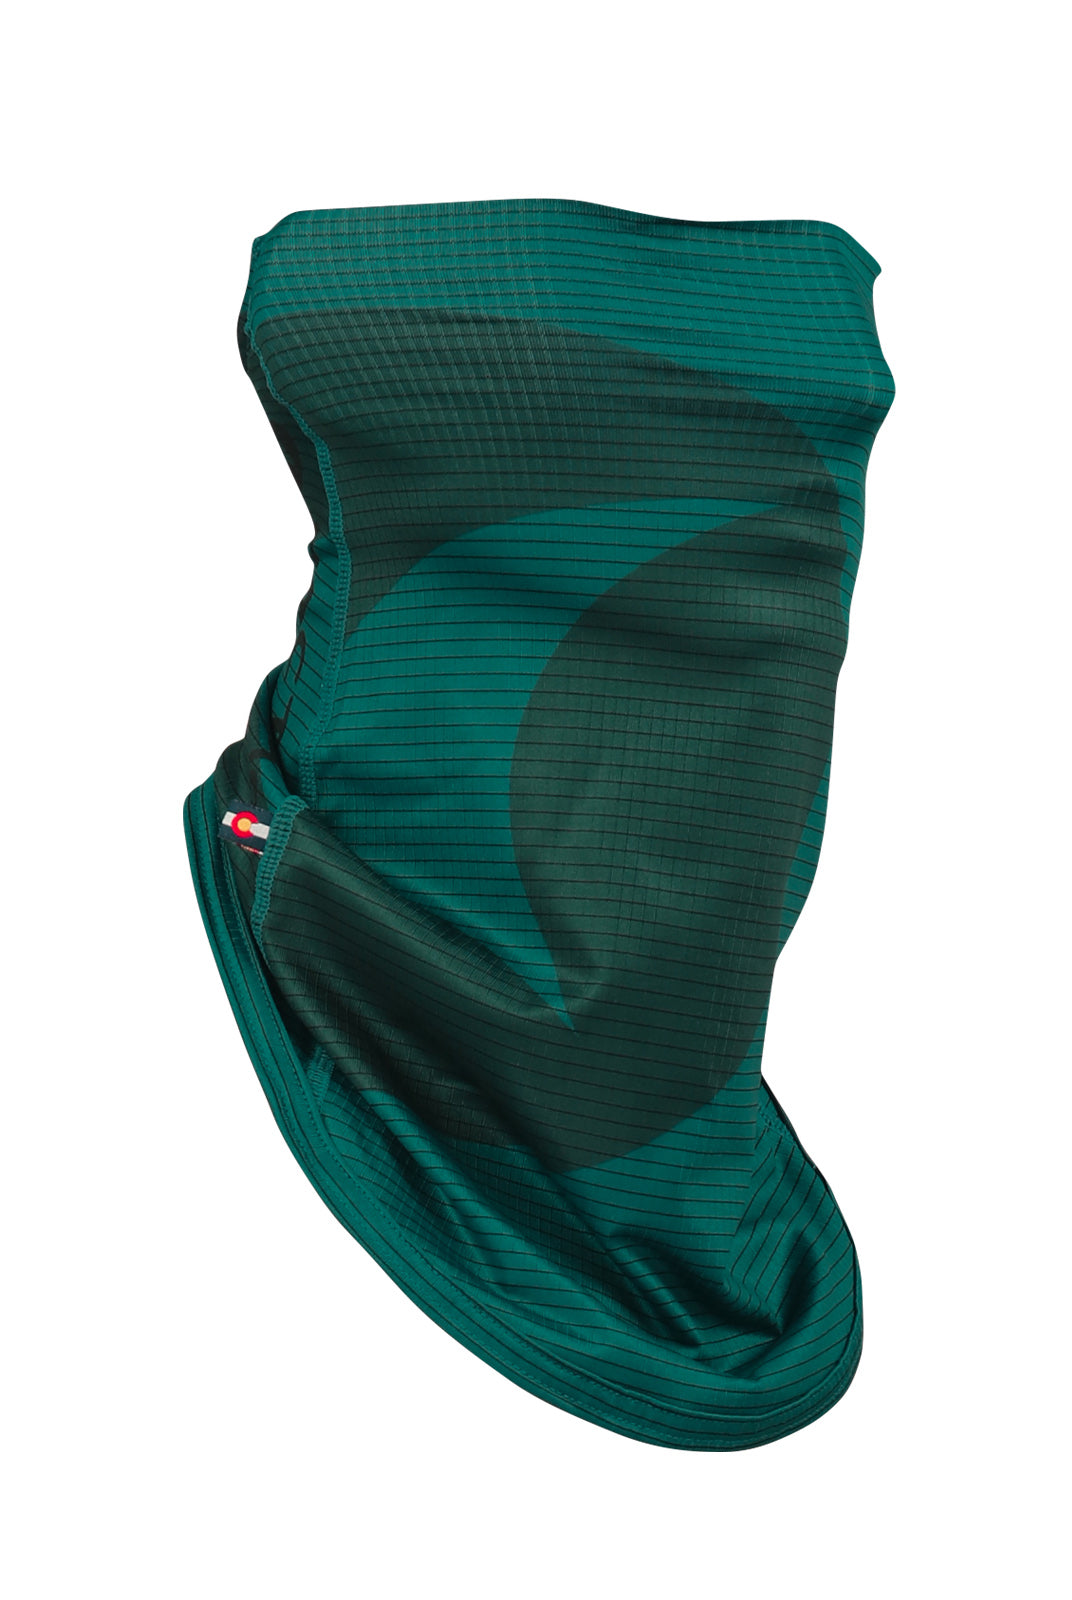 Teal Cycling Neck Gaiter - Side View